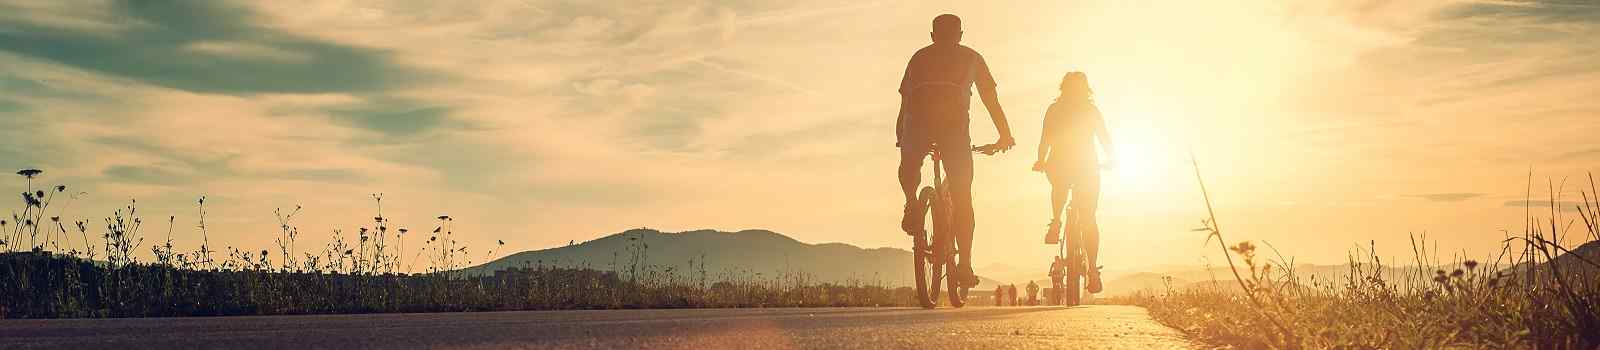 MAX-ZU-LUD  Cyclists are on the sunset road  shutterstock 498444379